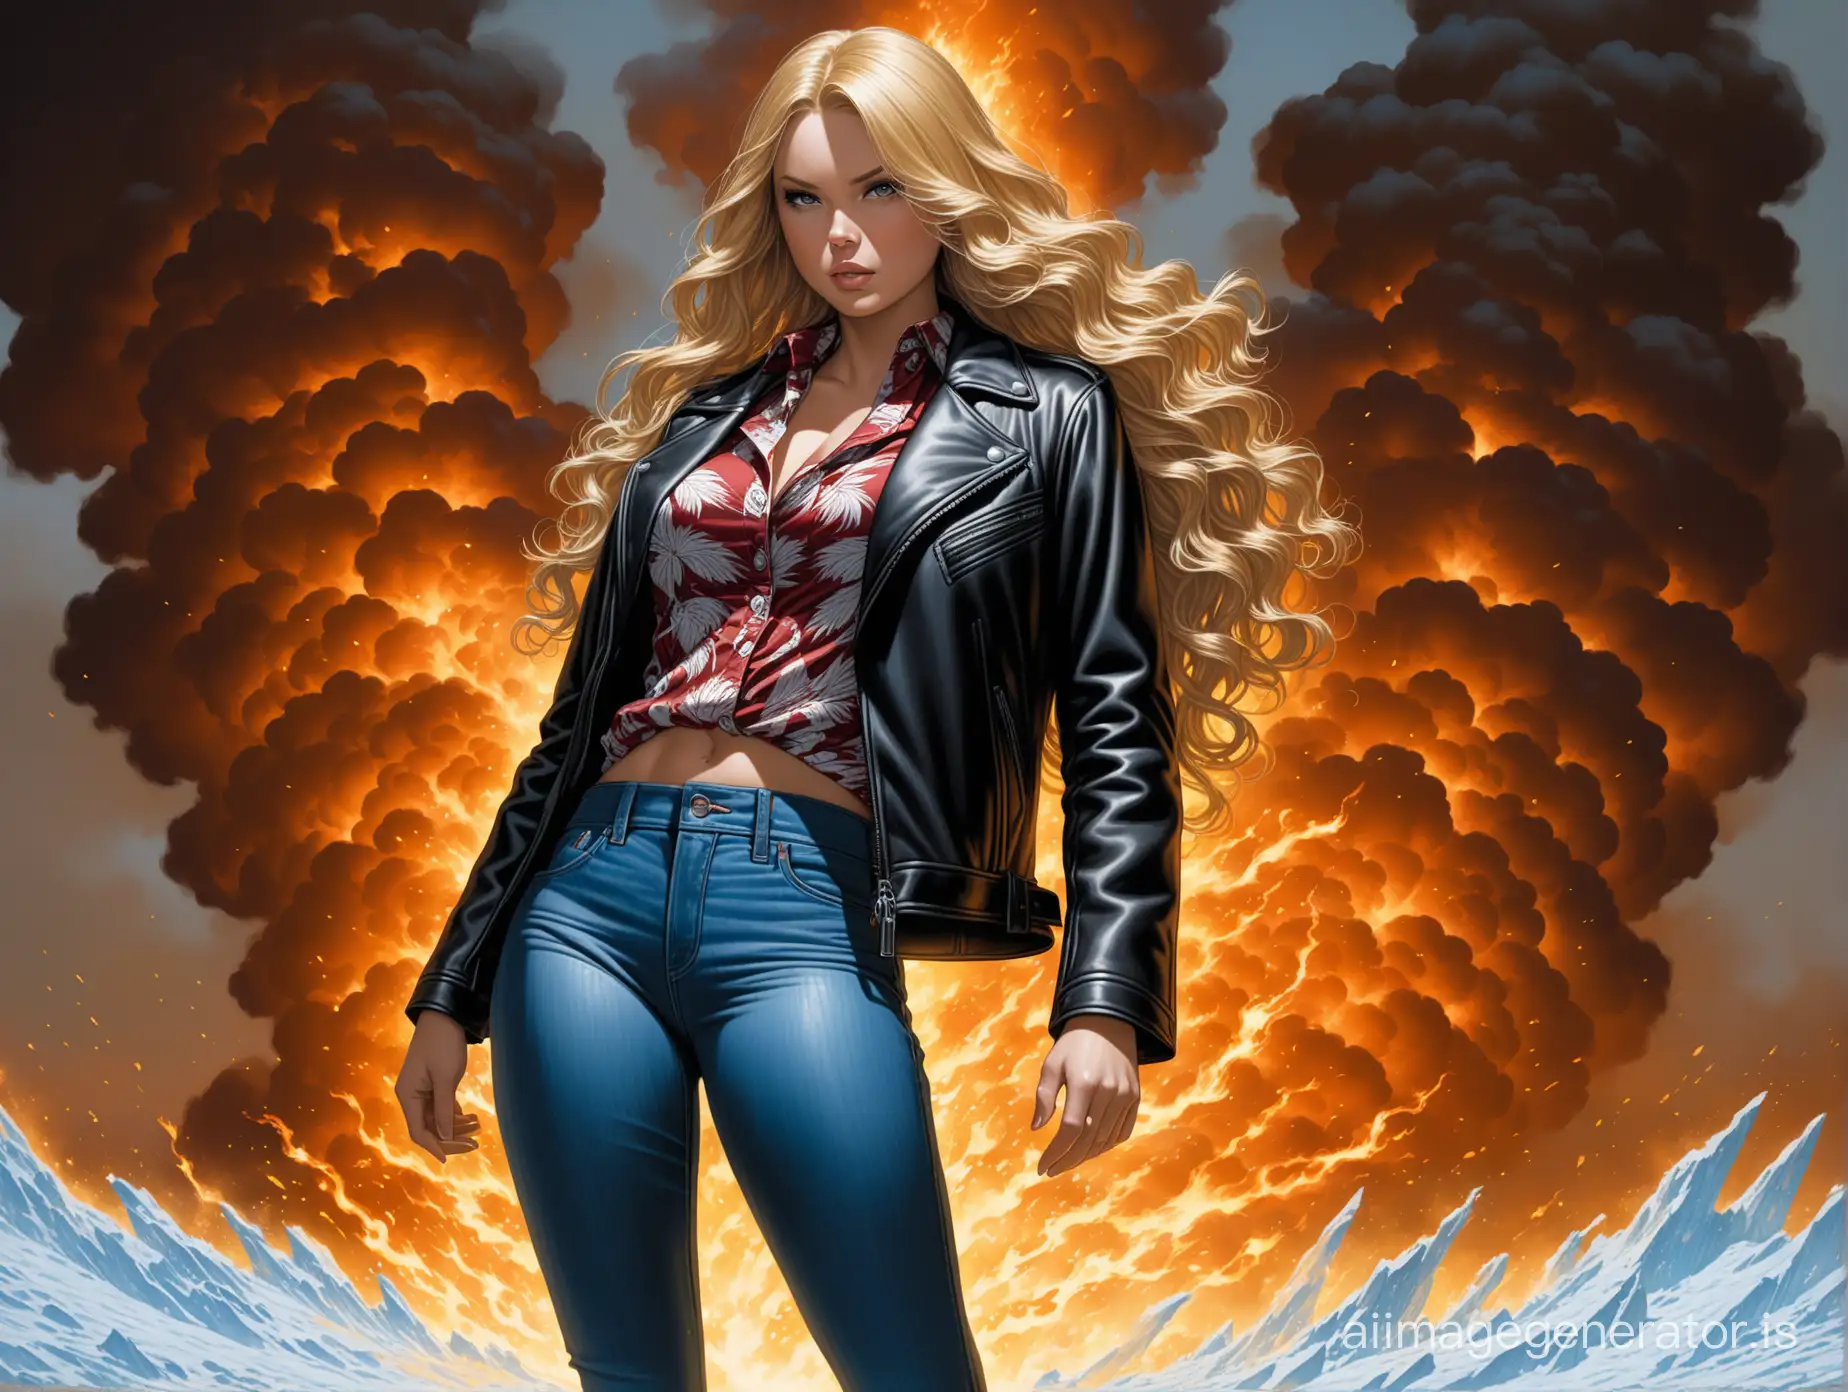 Blonde-and-Brunette-Girls-in-Contrasting-Styles-Against-Fire-and-Ice-Backdrop